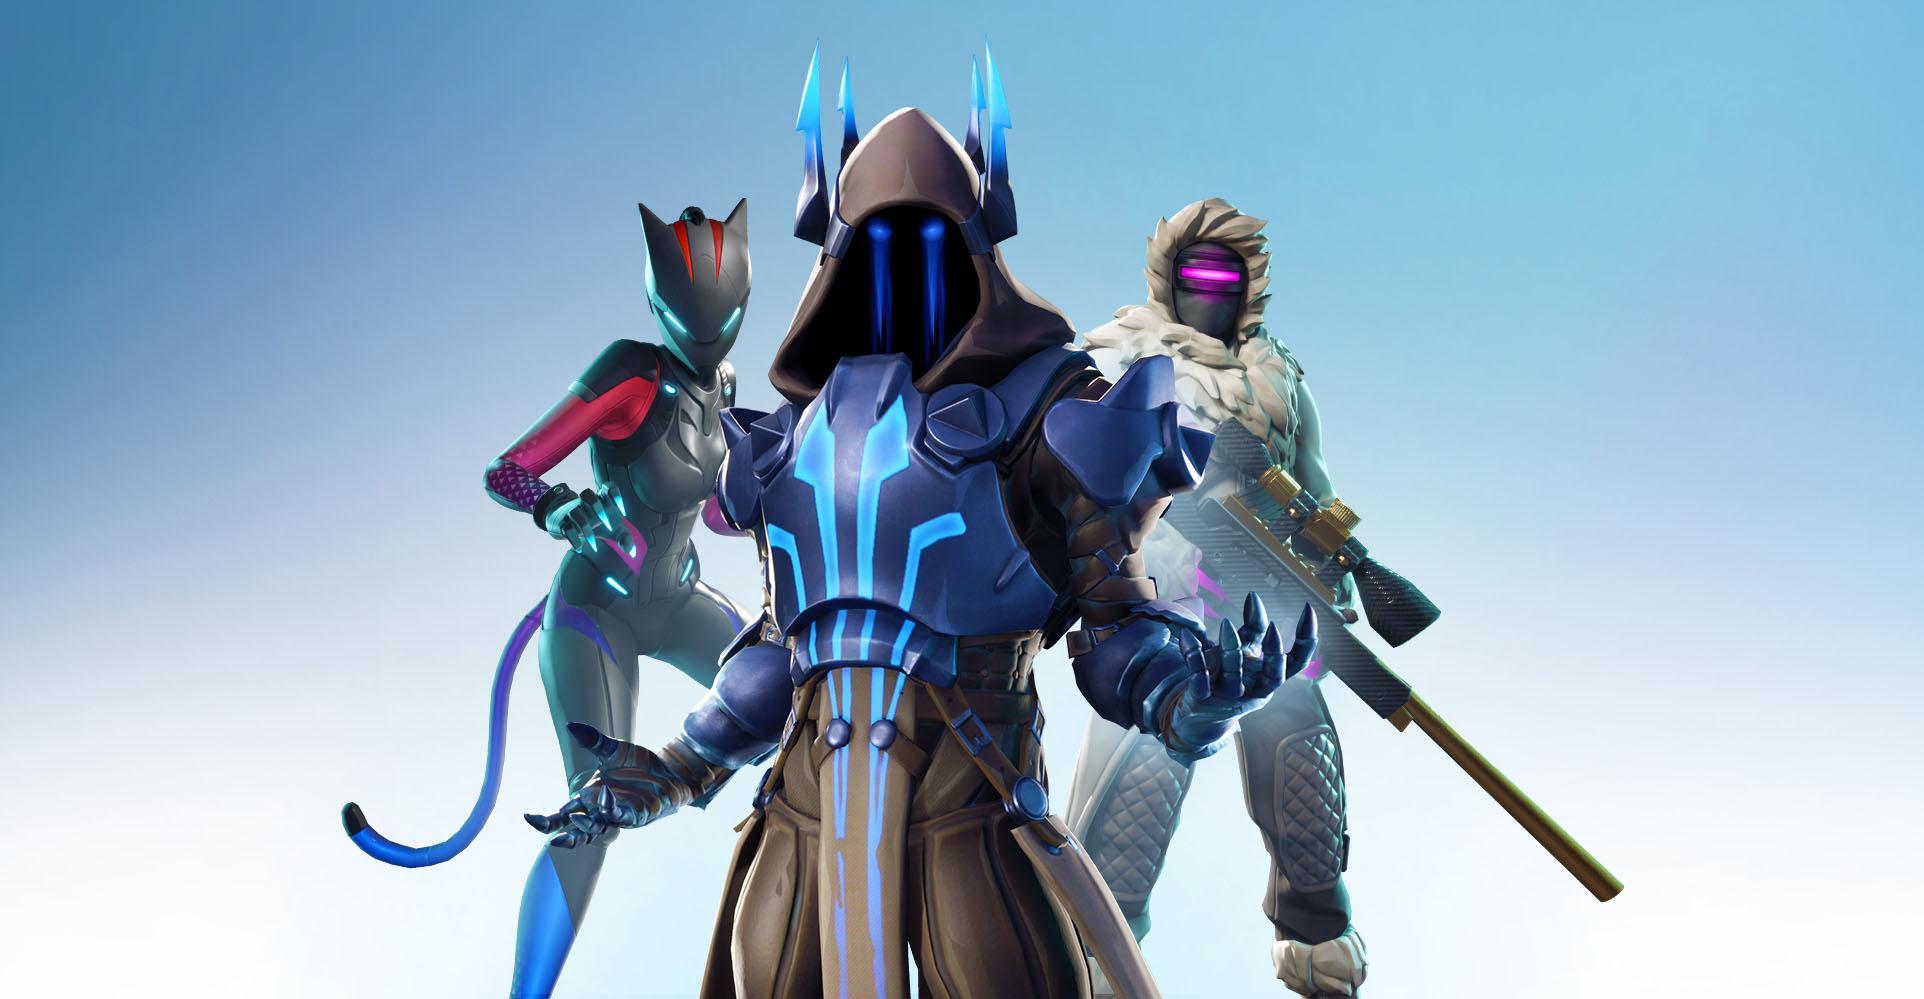 Ice King Fortnite Wallpapers Wallpaper Cave - fortnite season 7 lynx ice king and zenith wallpaper 1920x1080